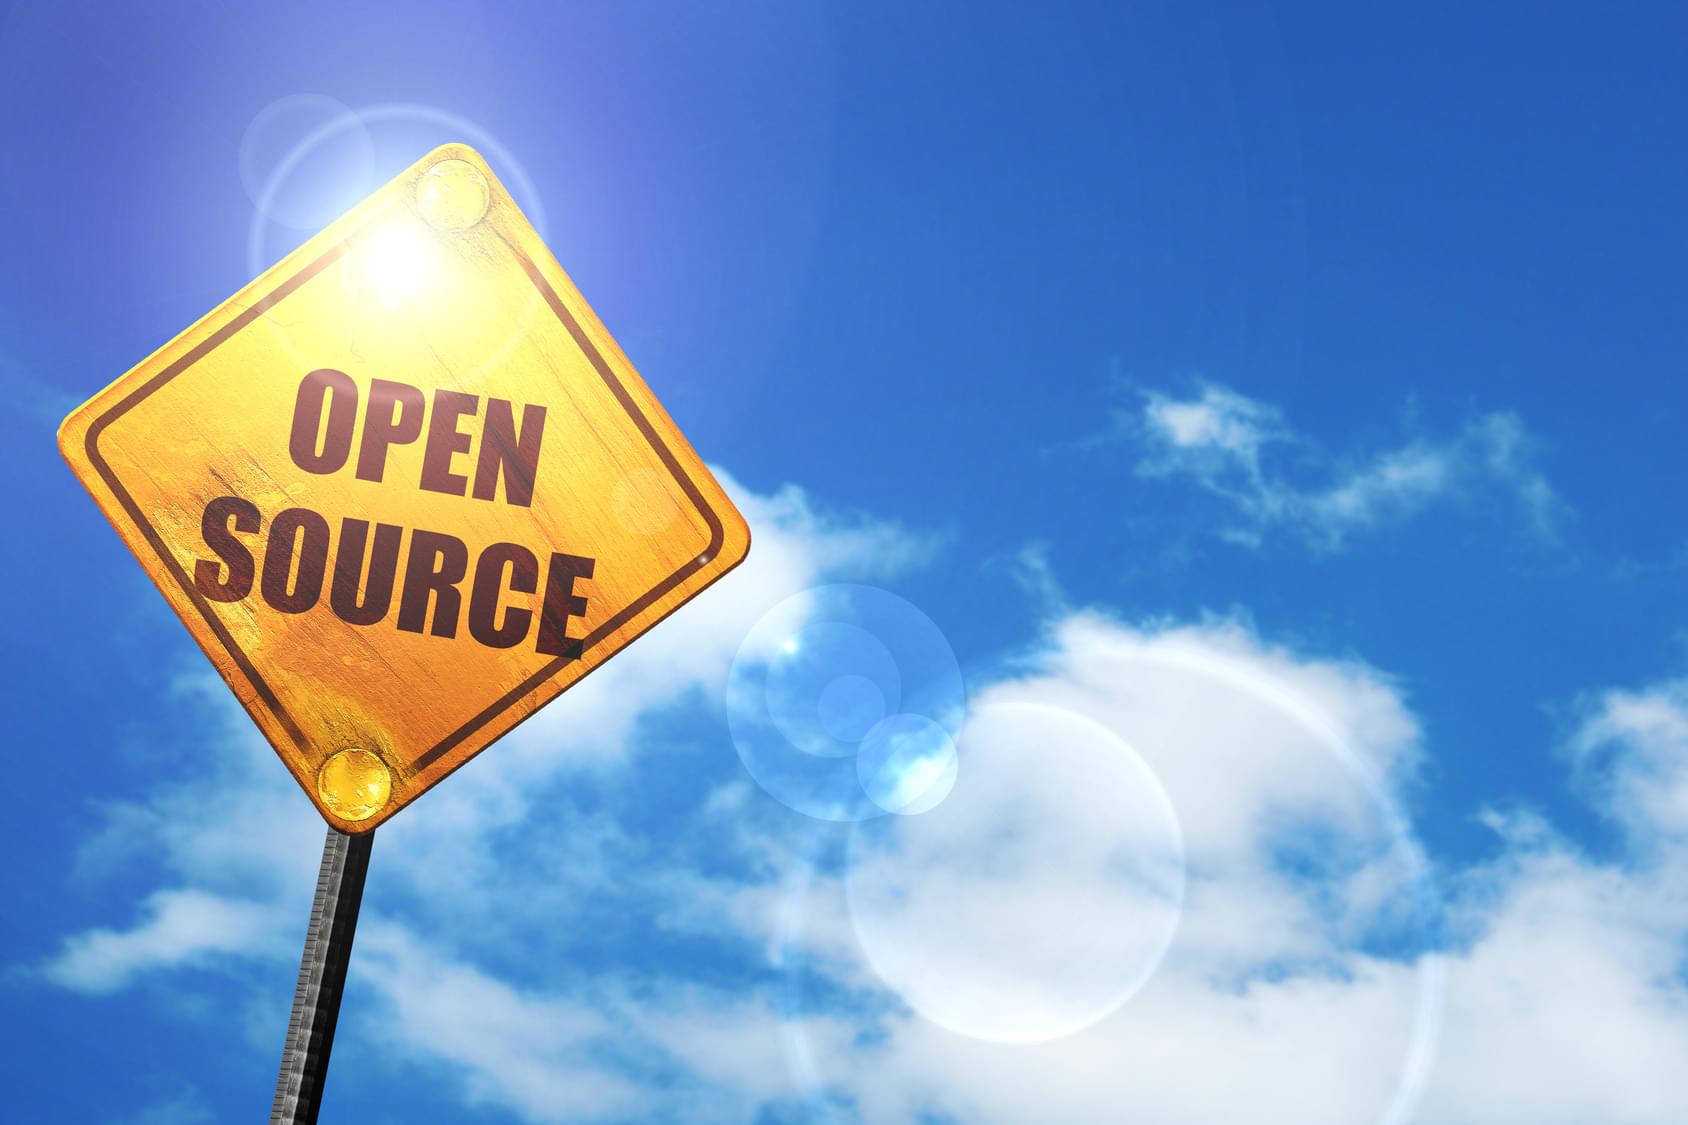 Editorial: What Does Open Source Mean to You?